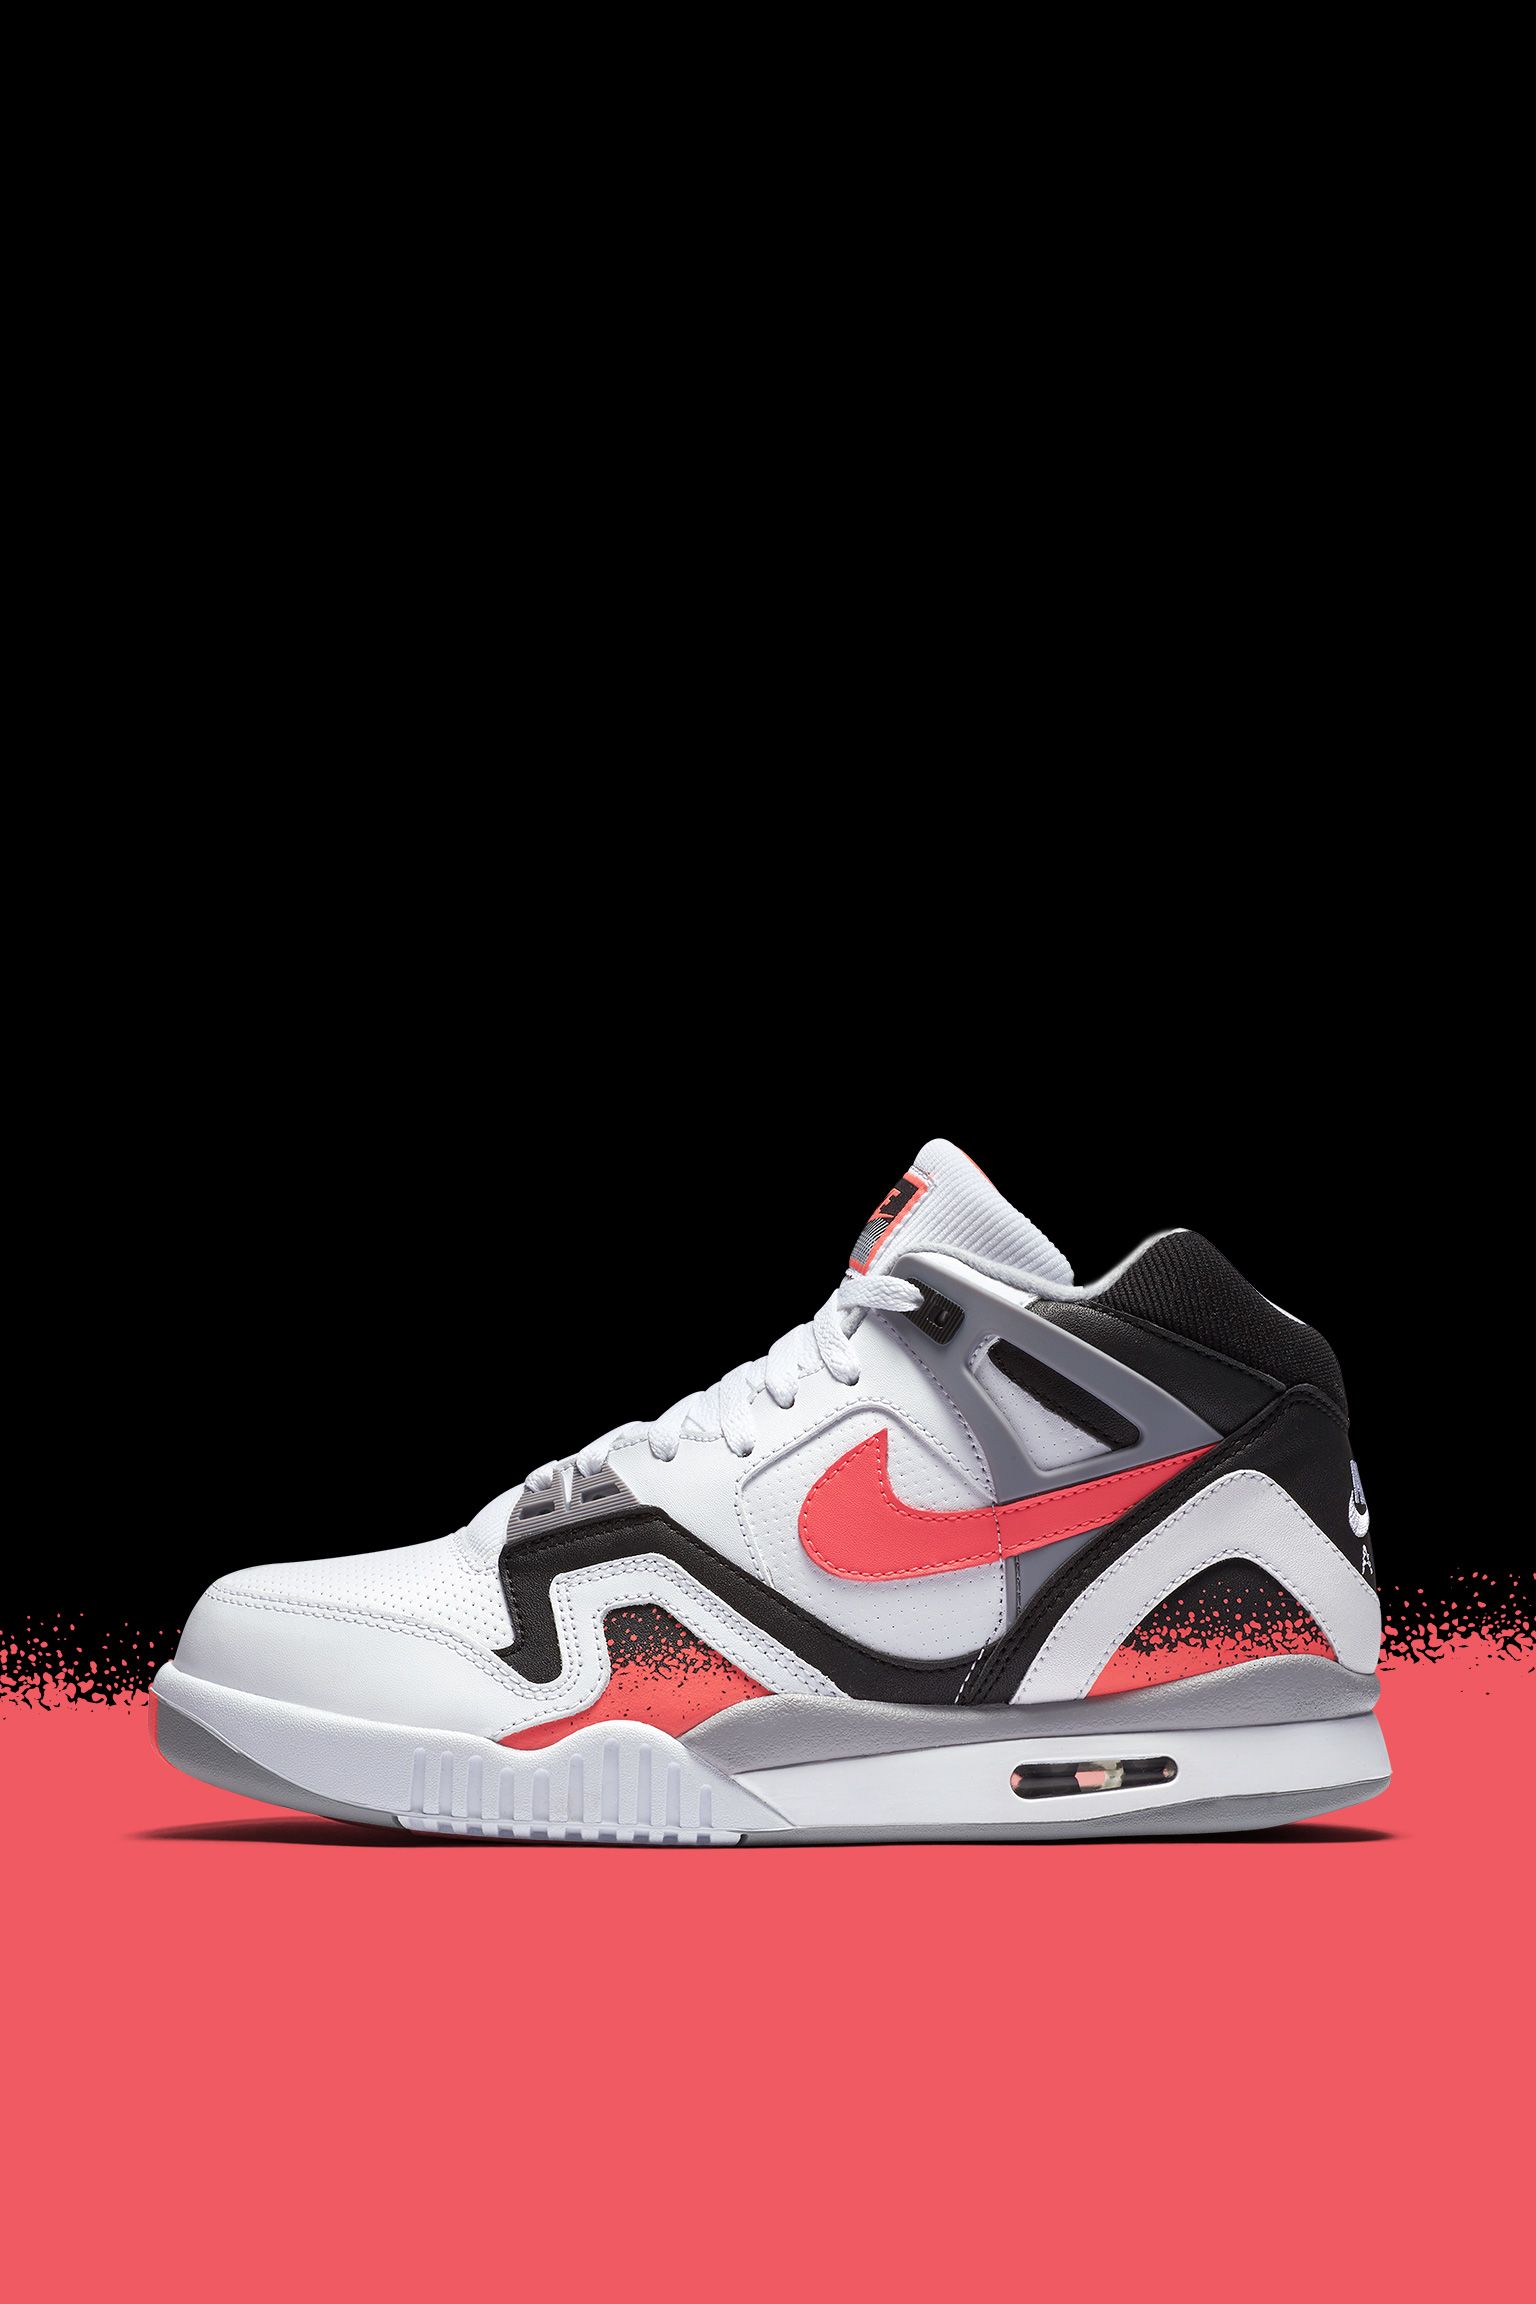 Banquet Unnecessary disinfect Nike Air Tech Challenge 2 'Hot Lava' 2016. Nike SNKRS